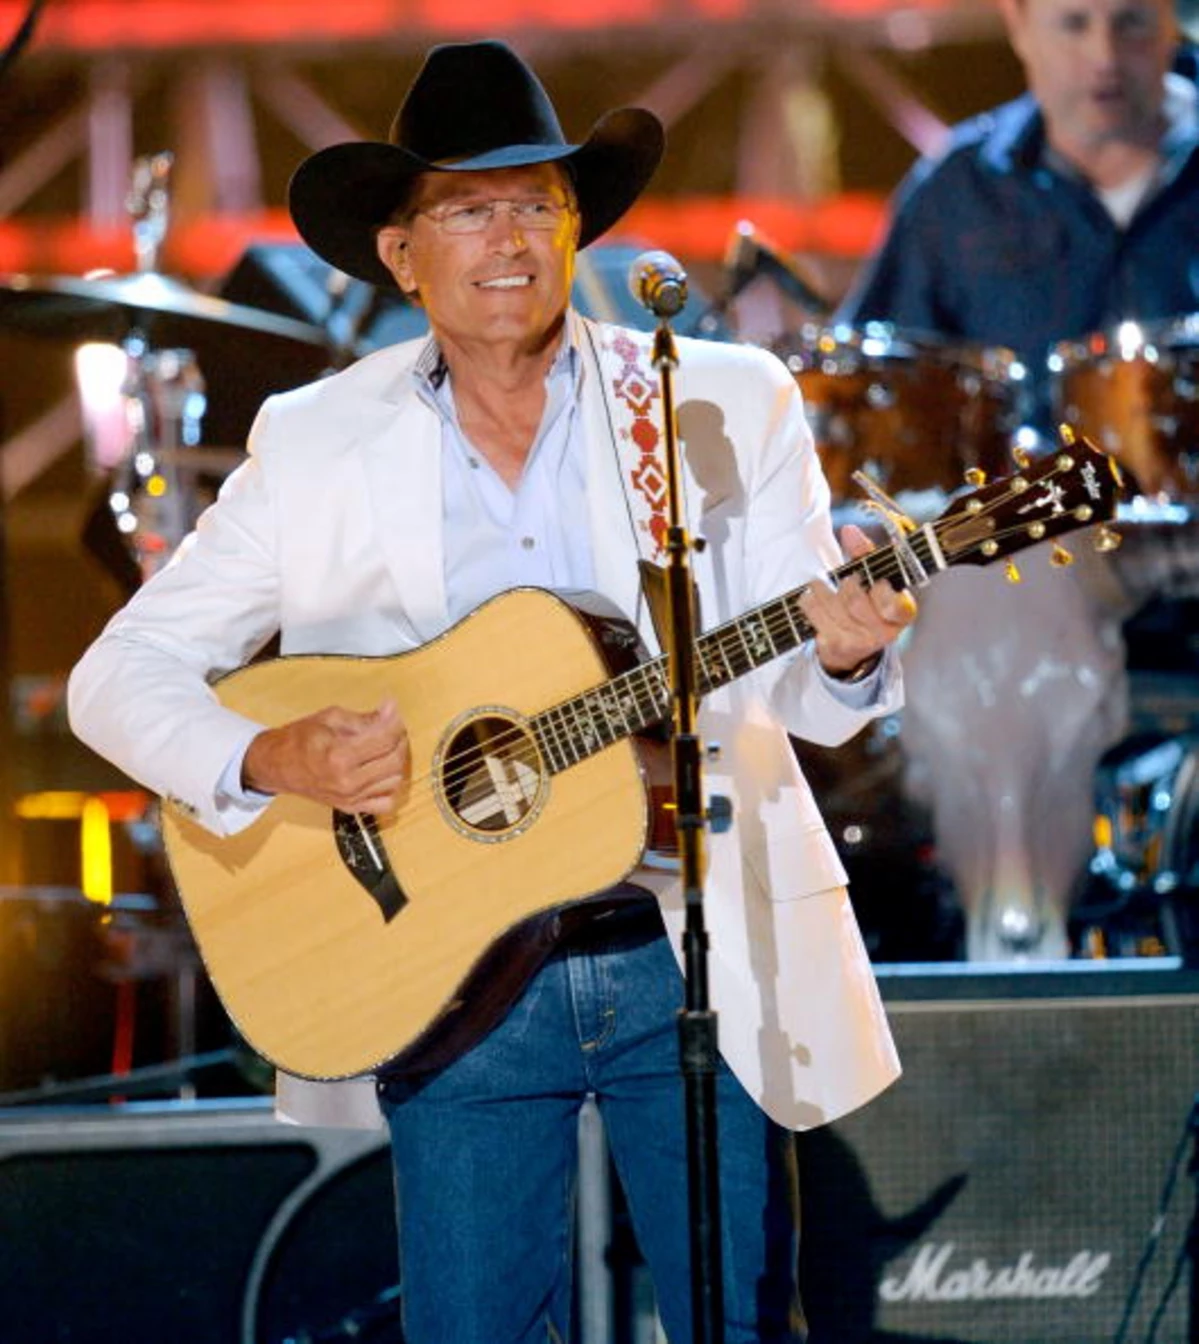 Win a Guitar Signed by George Strait [CONTEST]